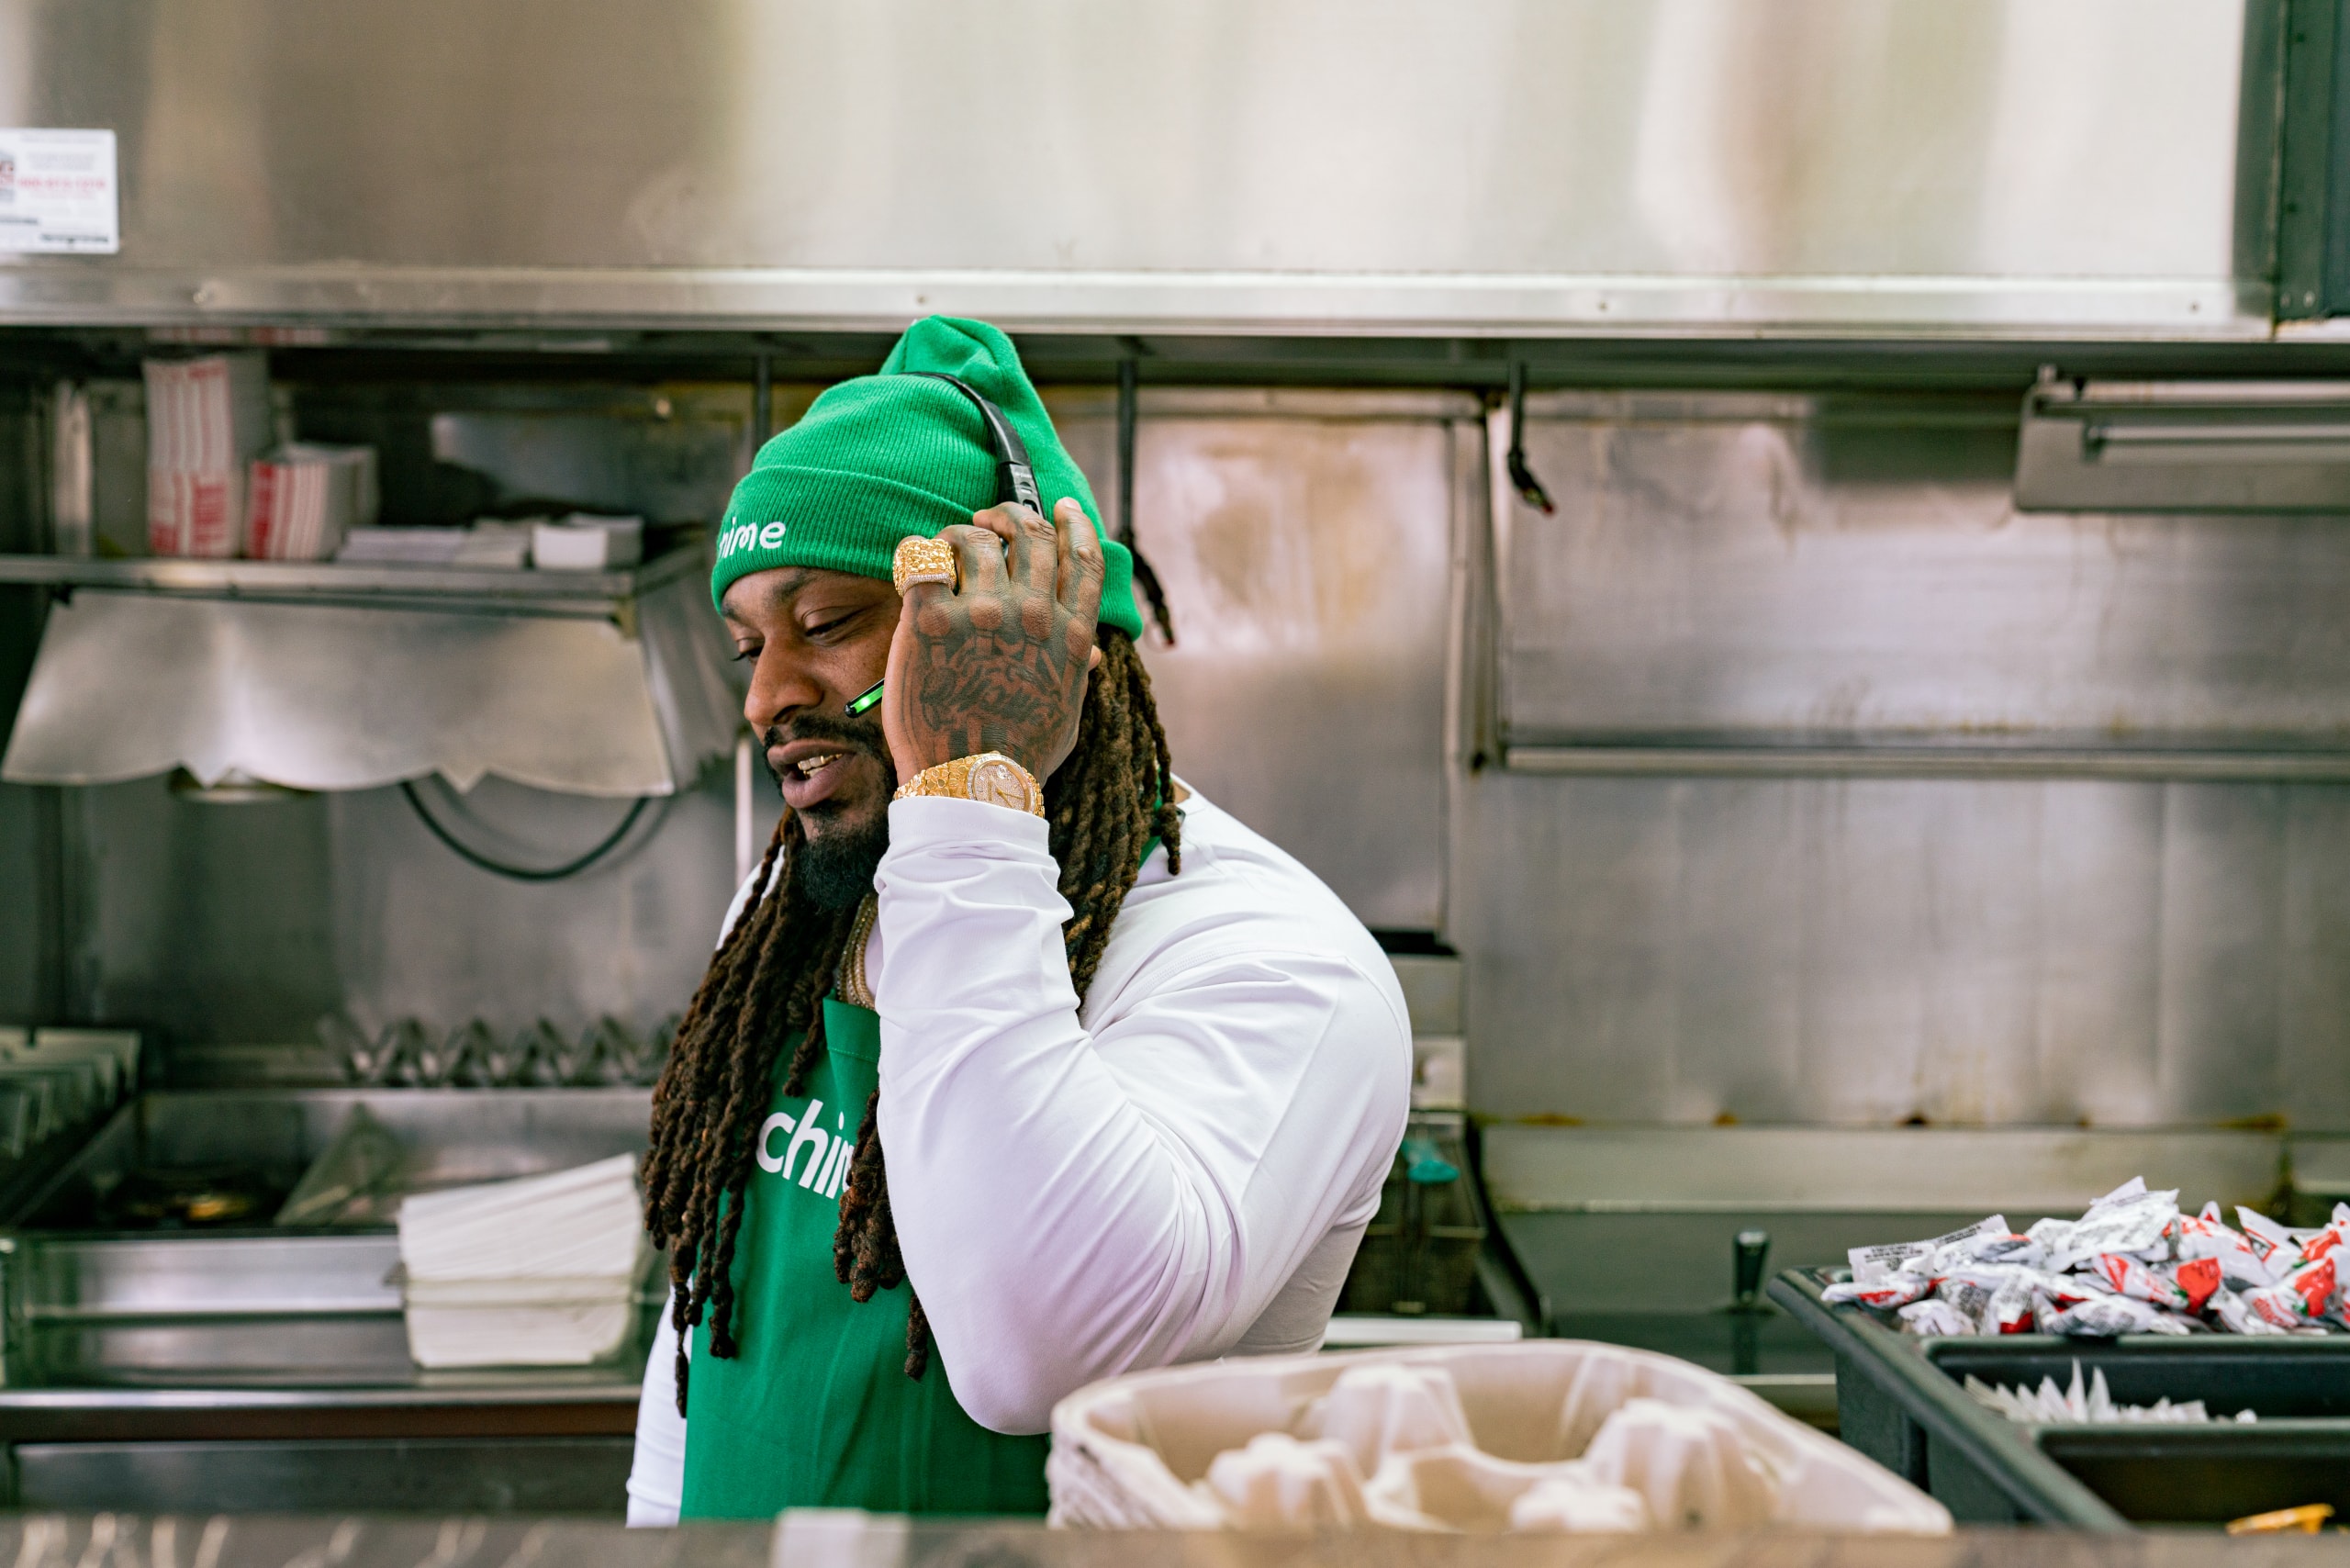 Marshawn Lynch and Chime Team Up to Talk Financial Progress